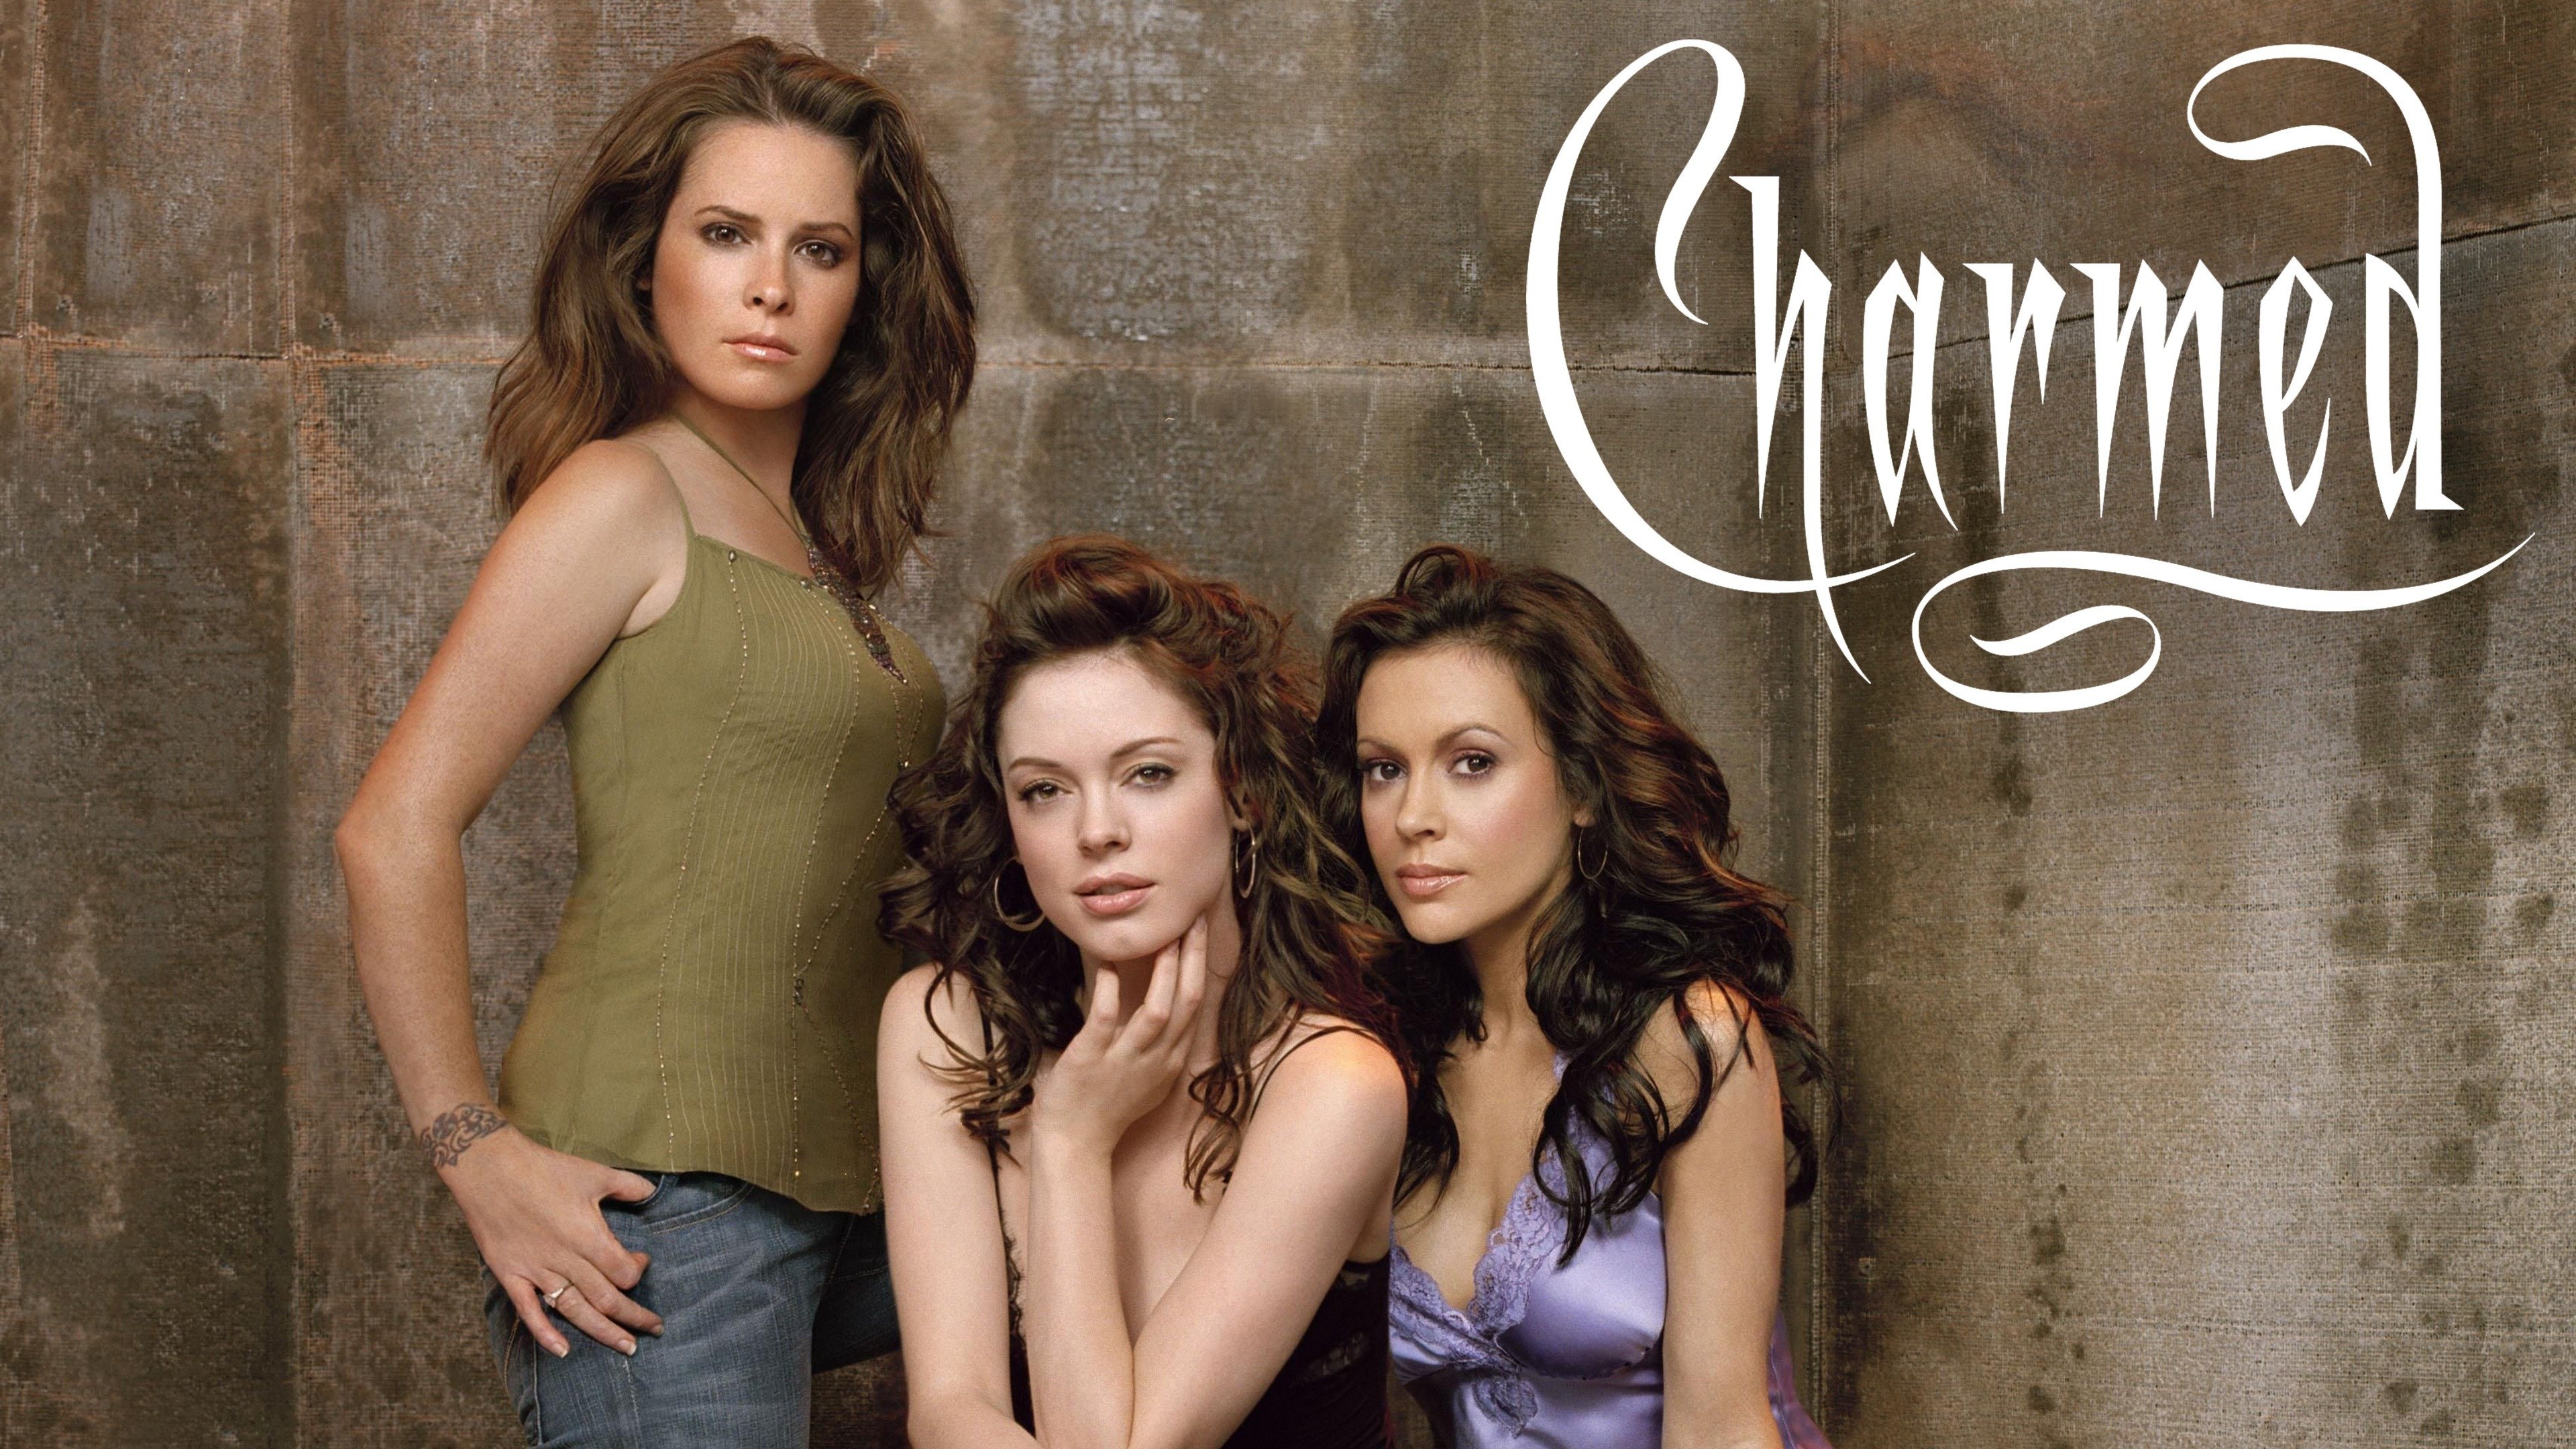 Charmed (1998) Wallpapers